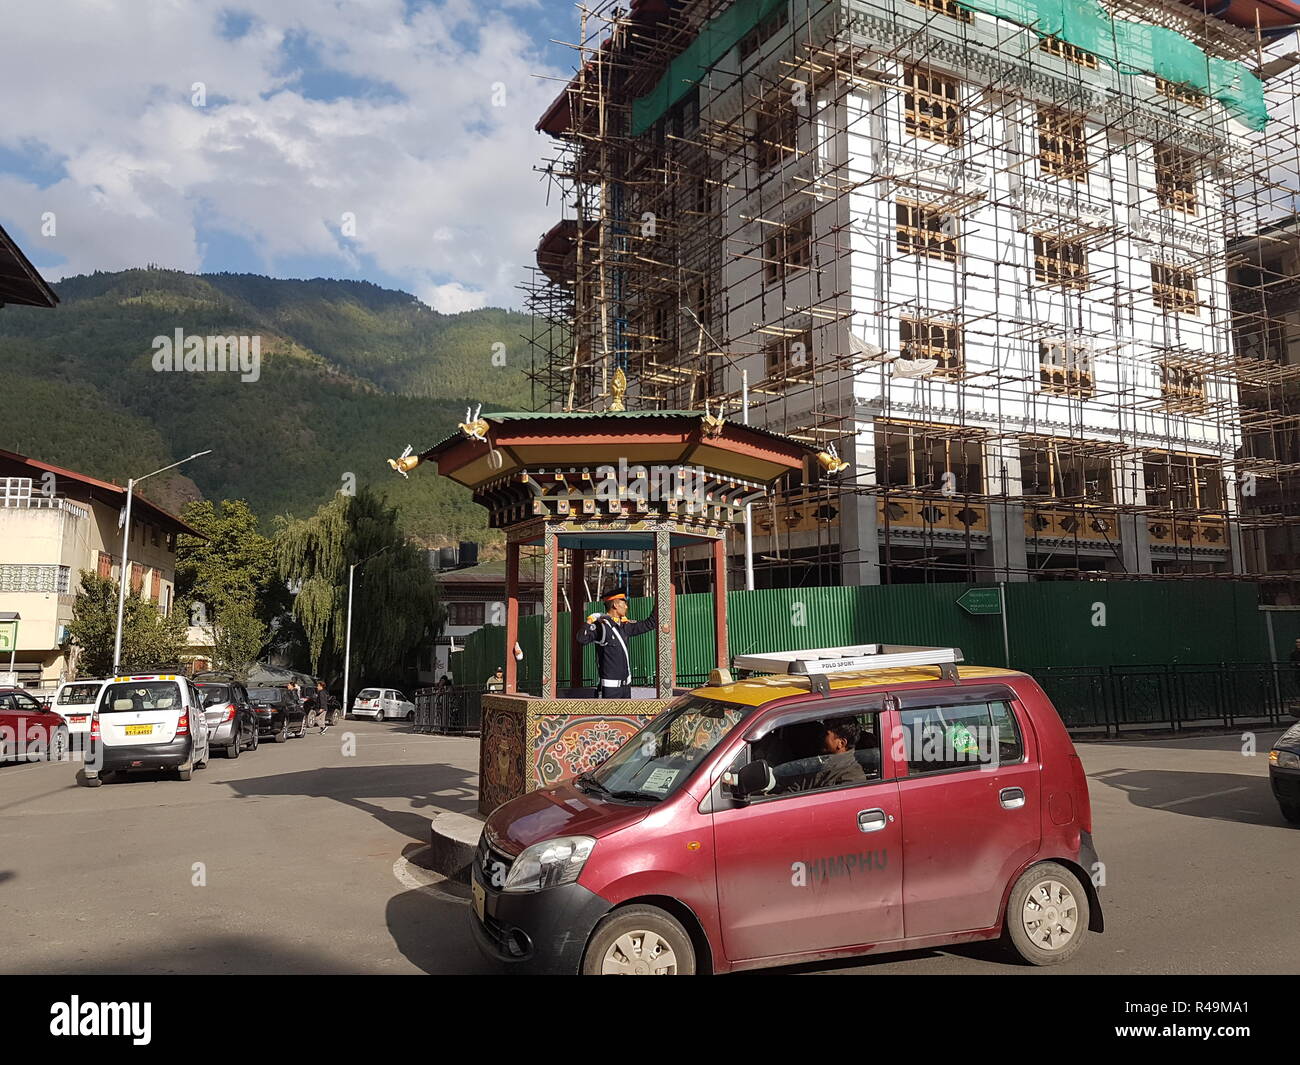 15 October 2018 Bhutan Thimphu In A Cottage At A Crossroads A